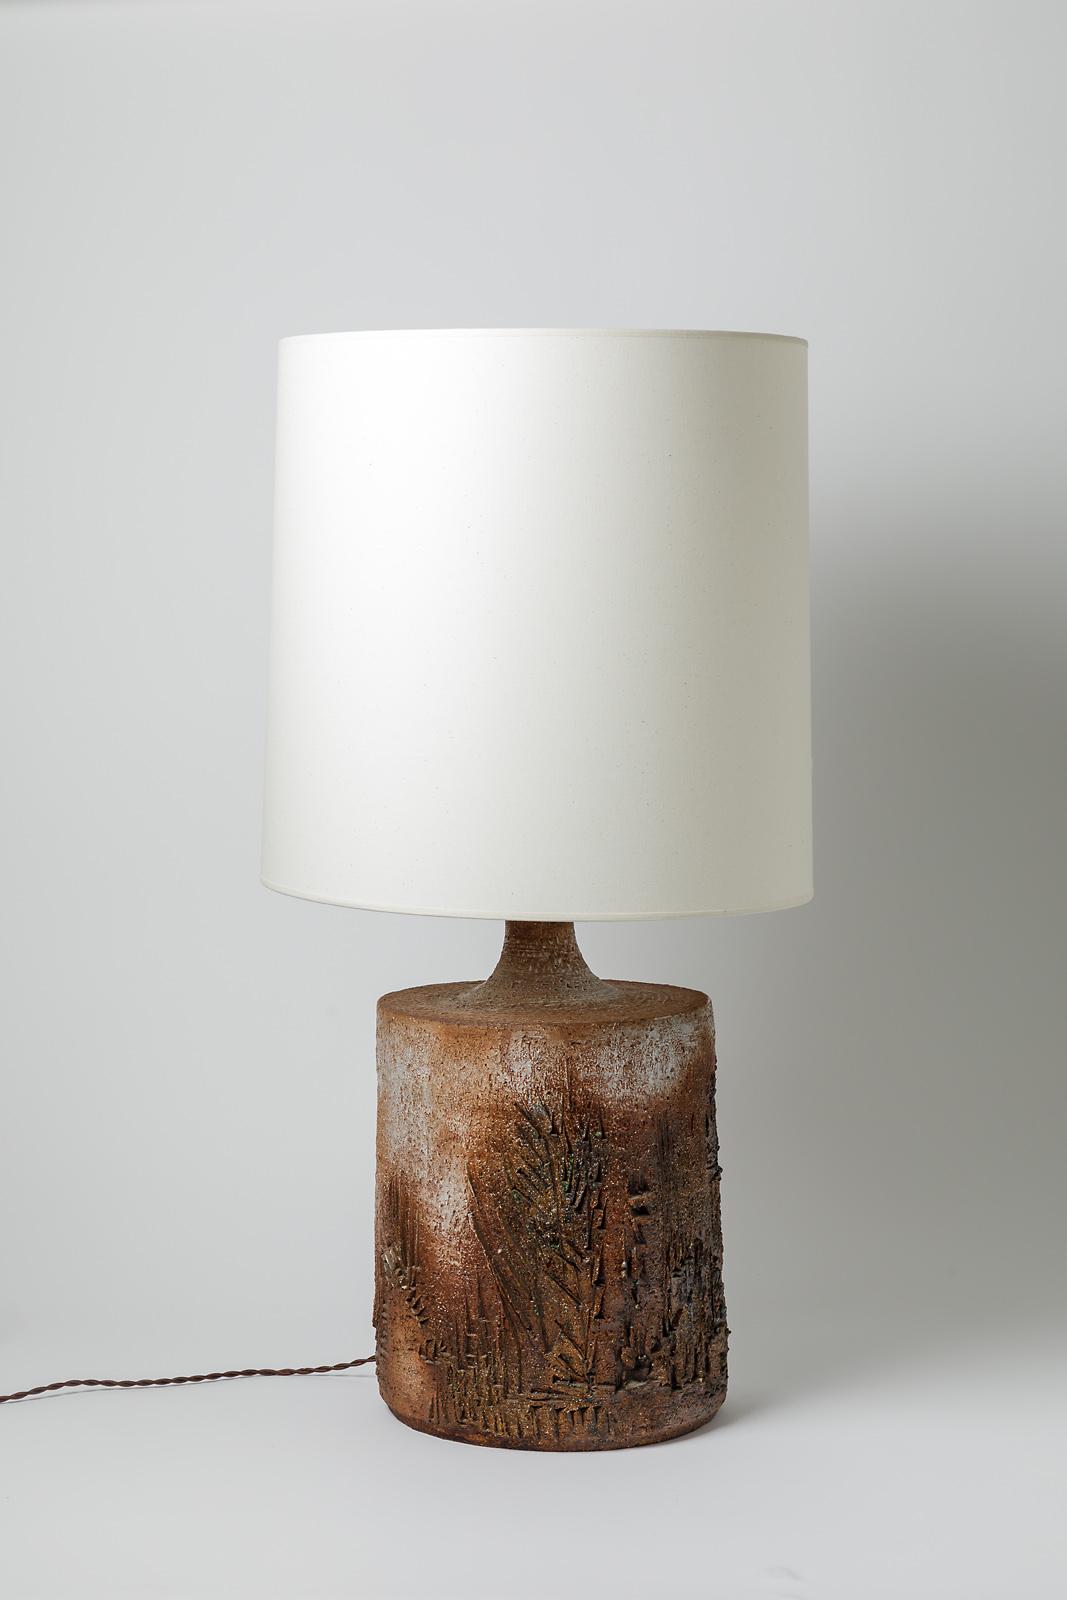 A ceramic table lamp with brown glaze decoration by Huguette & Marius Bessone.
Sold with a new lamp shaded new european electrical system
Perfect original conditions.
Signed under the base.
Circa 1970- 1980.

Dimensions :
- Ceramic only : 40 x 25, 5